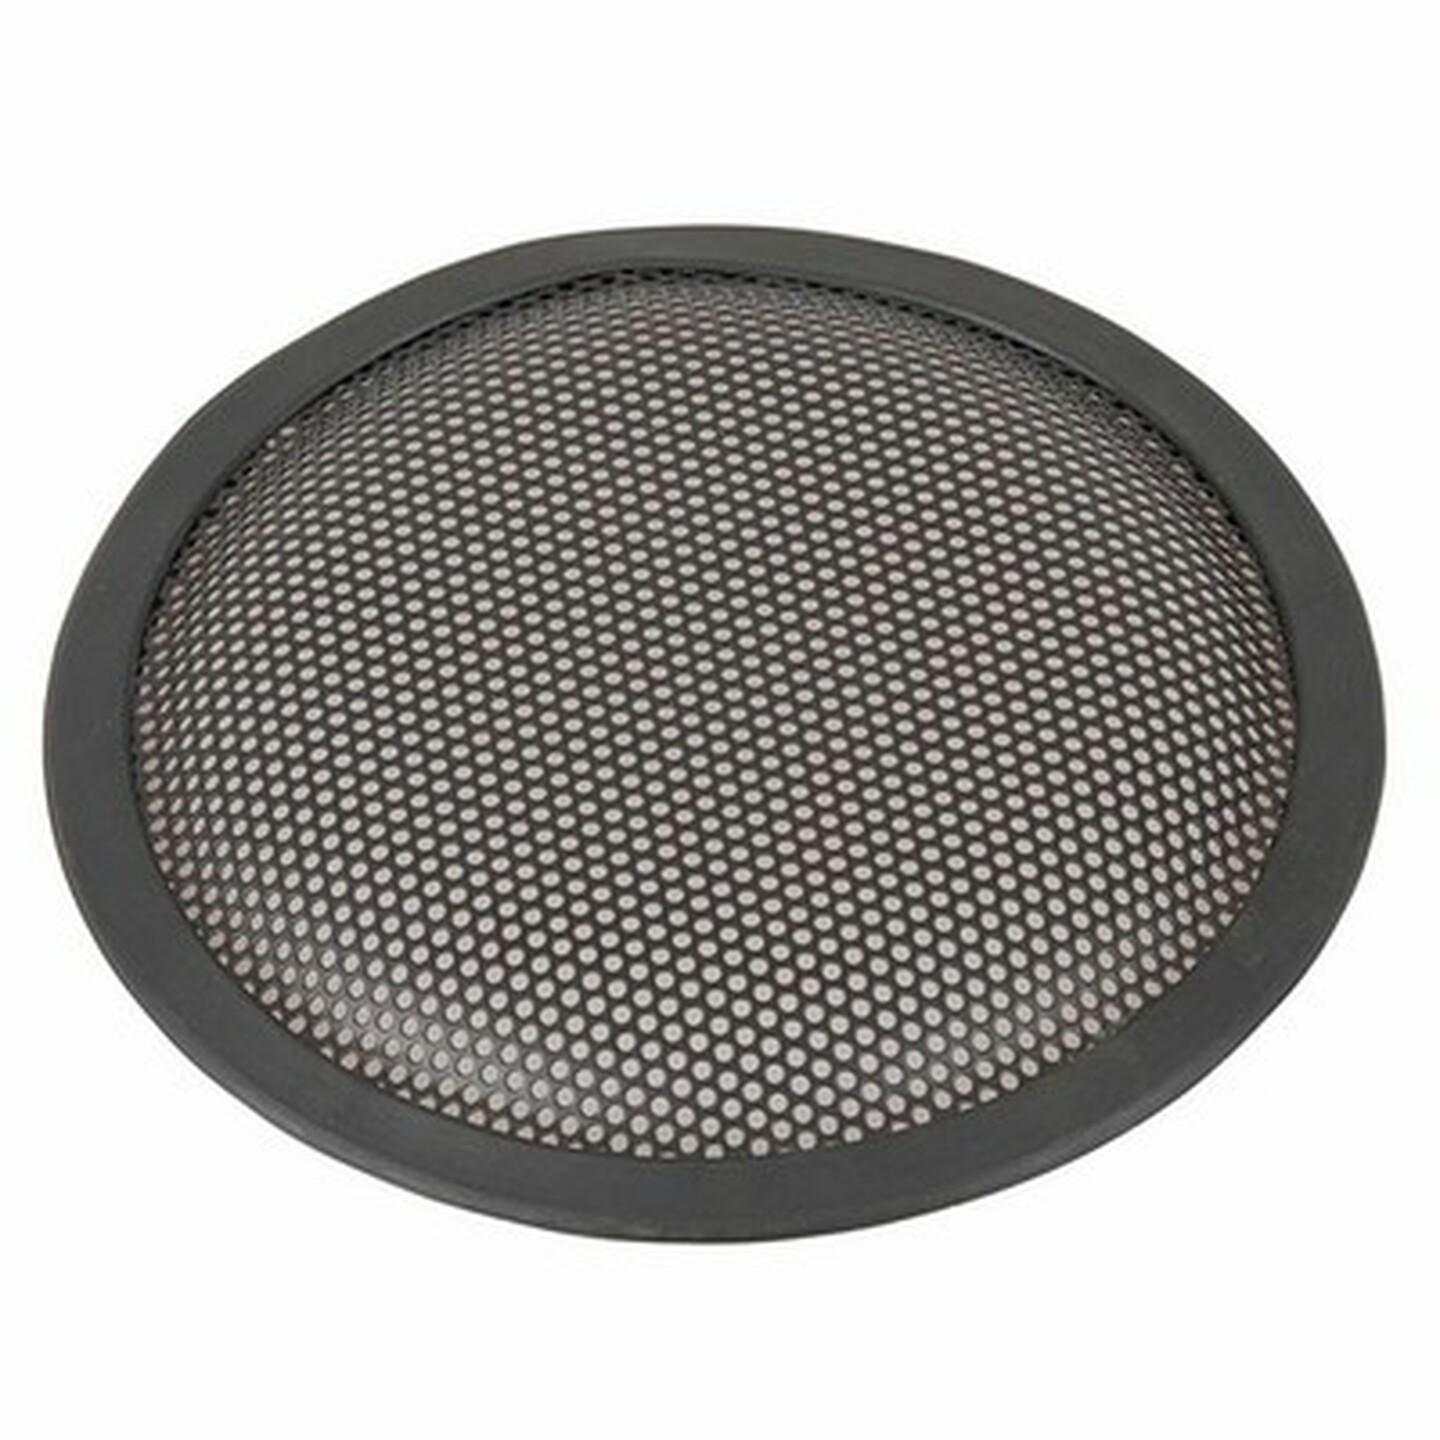 6 Speaker Protection Grille with Clips